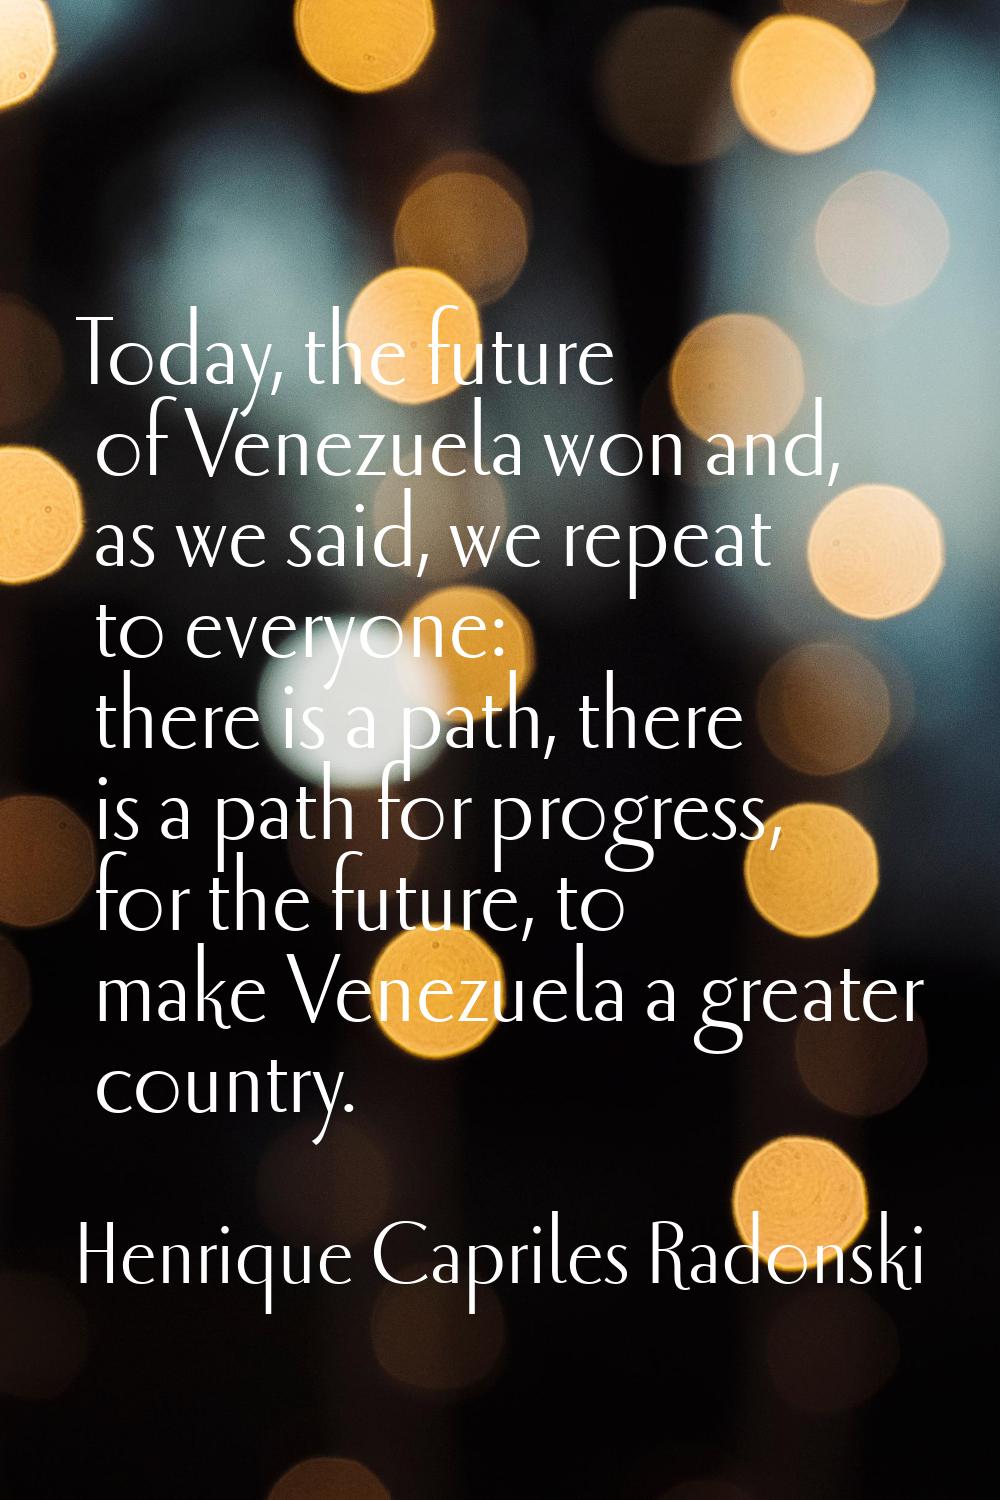 Today, the future of Venezuela won and, as we said, we repeat to everyone: there is a path, there i